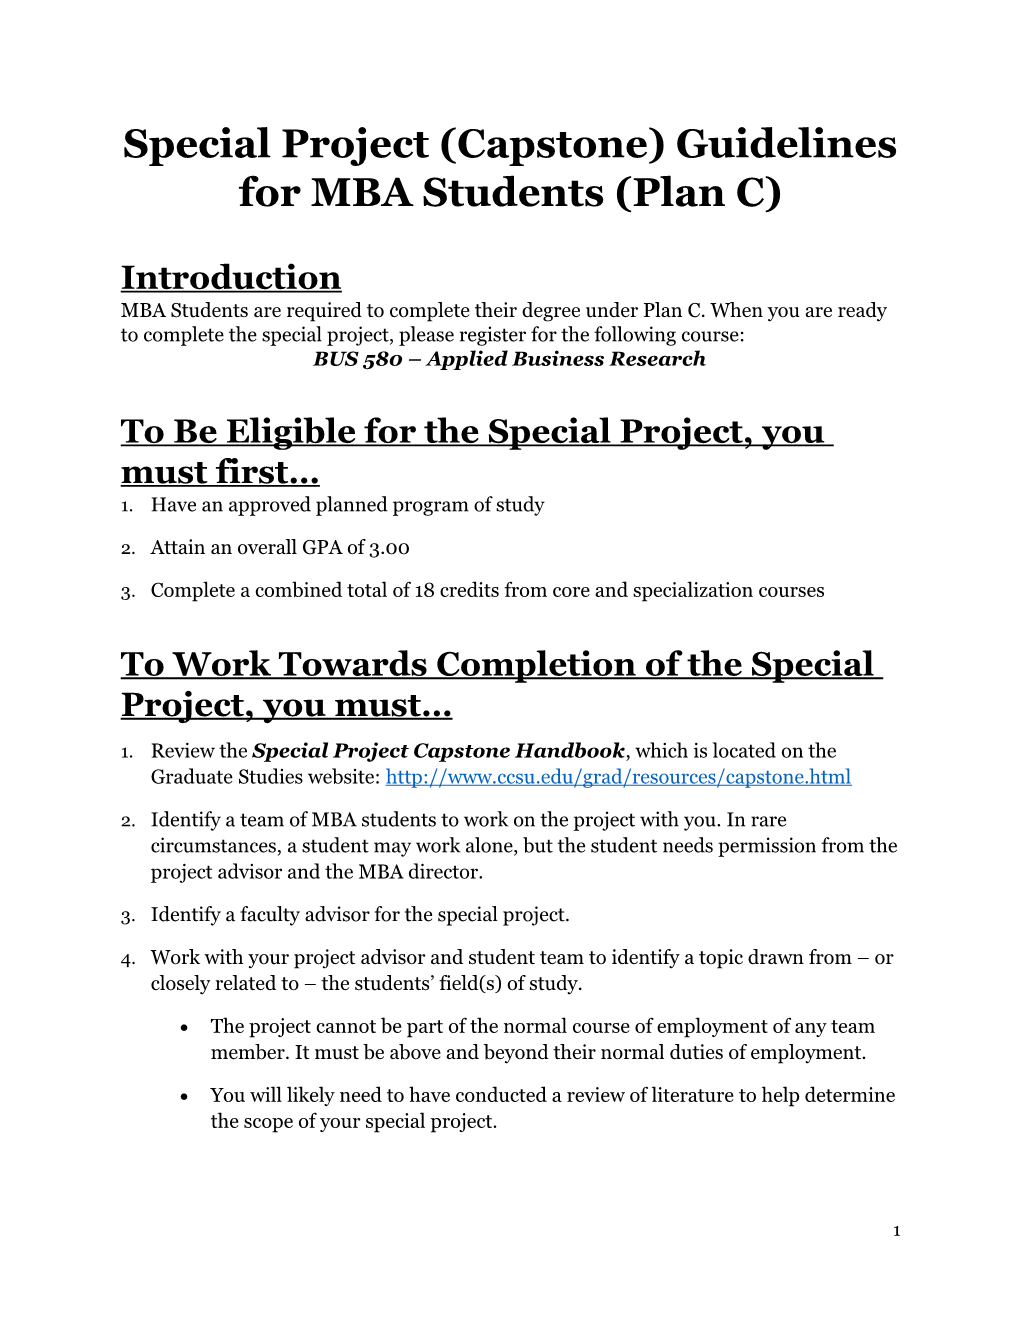 Special Project (Capstone) Guidelines for MBA Students (Plan C)